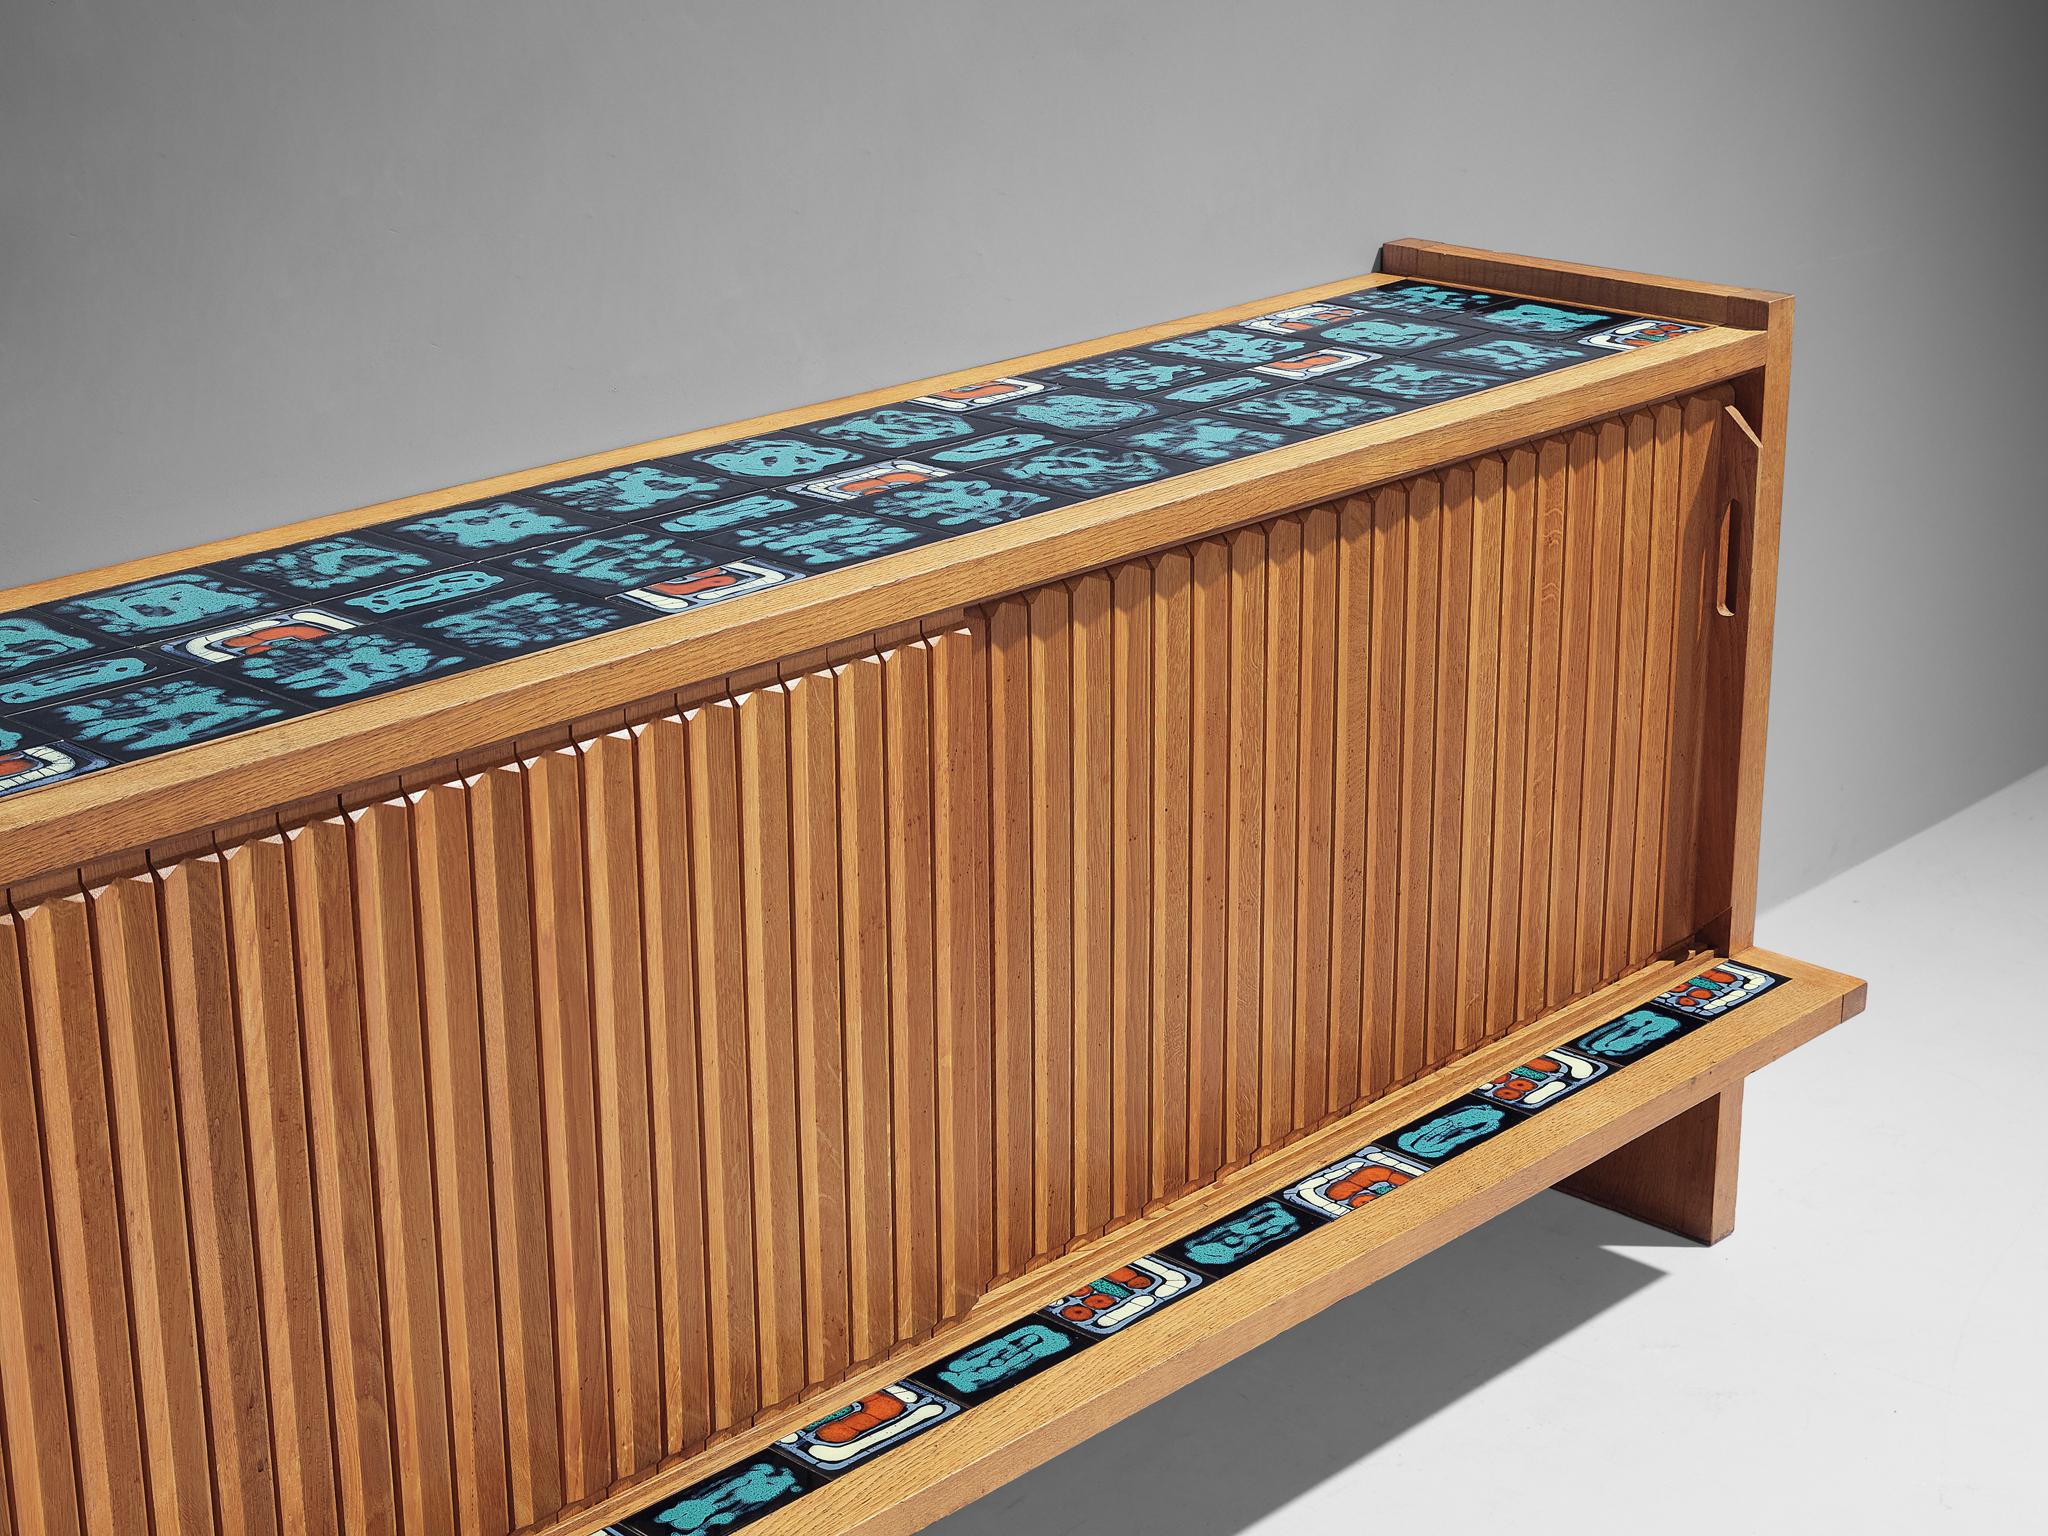 Mid-Century Modern Guillerme et Chambron Sideboard in Solid Oak with Turquoise Ceramic Tiles